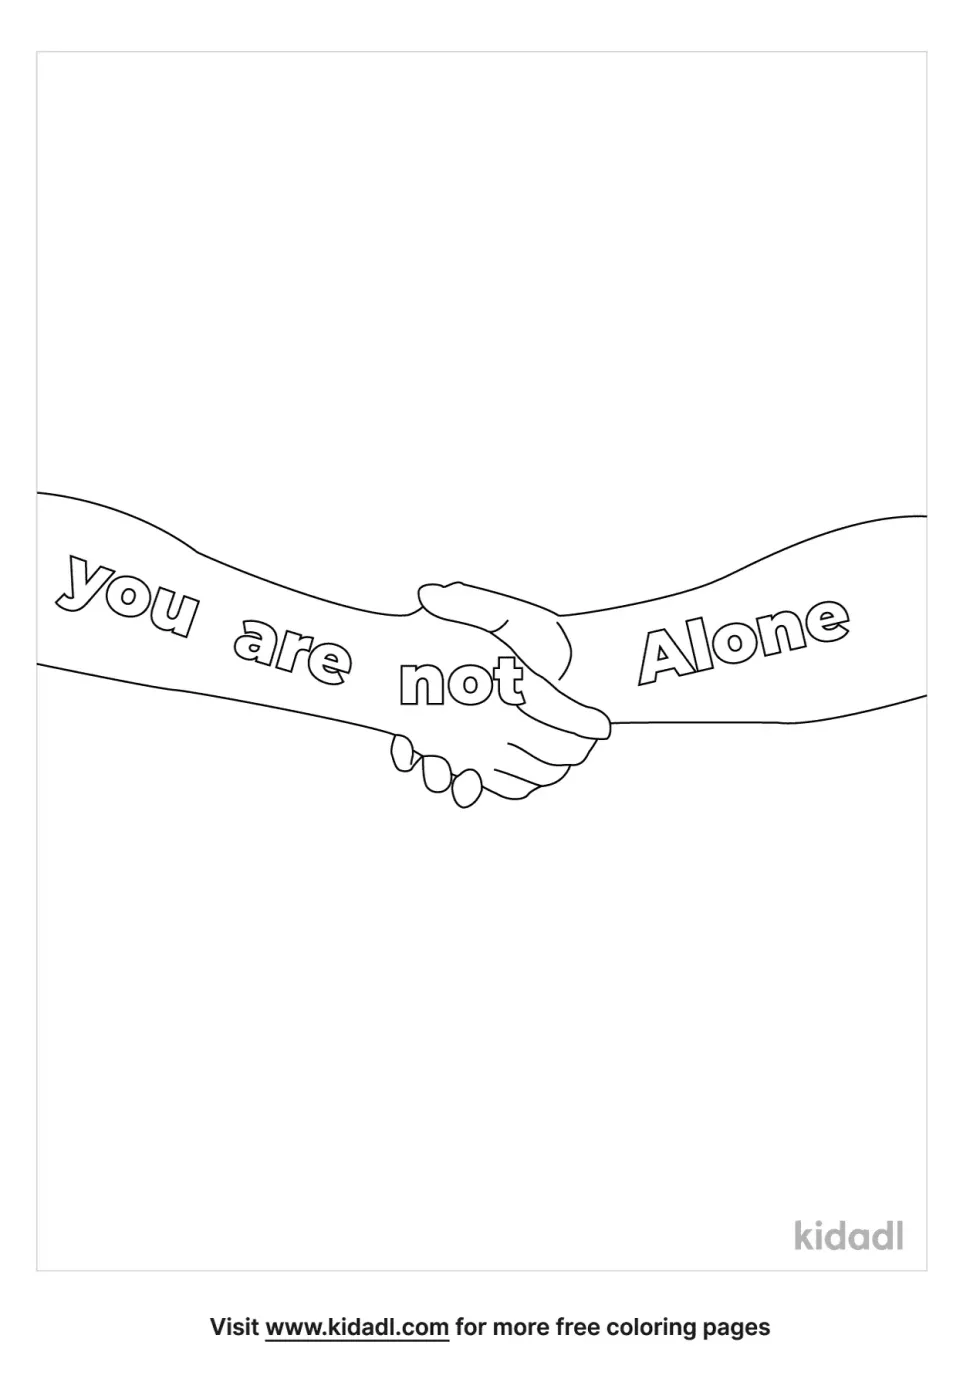 You Are Not Alone Coloring Page